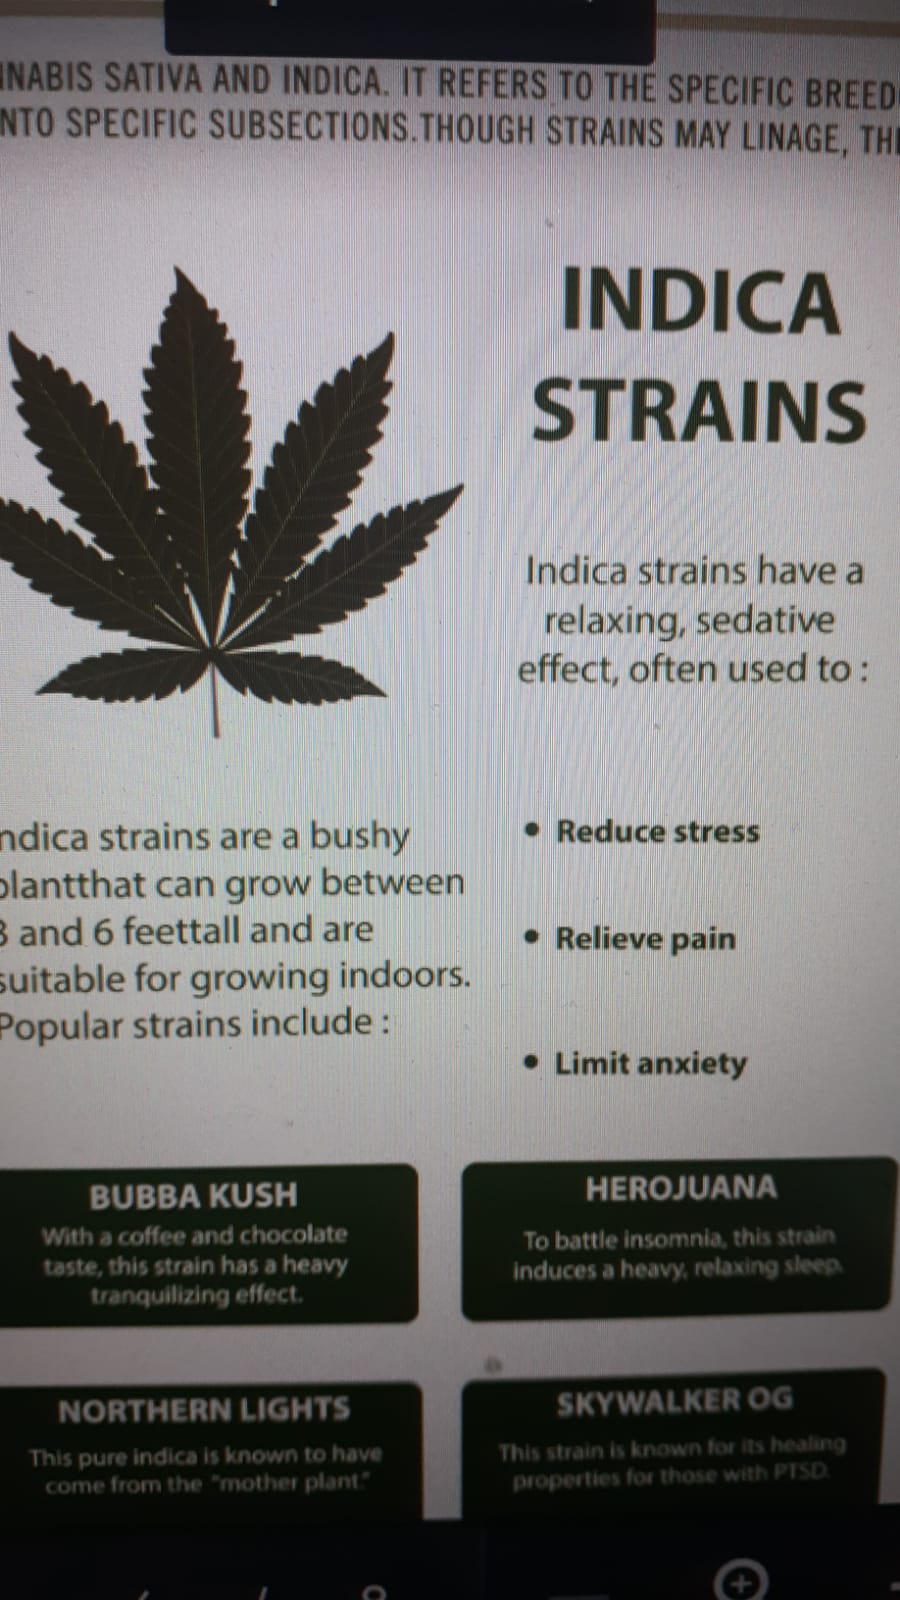 INDICA STRAINS have a relaxing, sedative effect. often used to: reduce stress